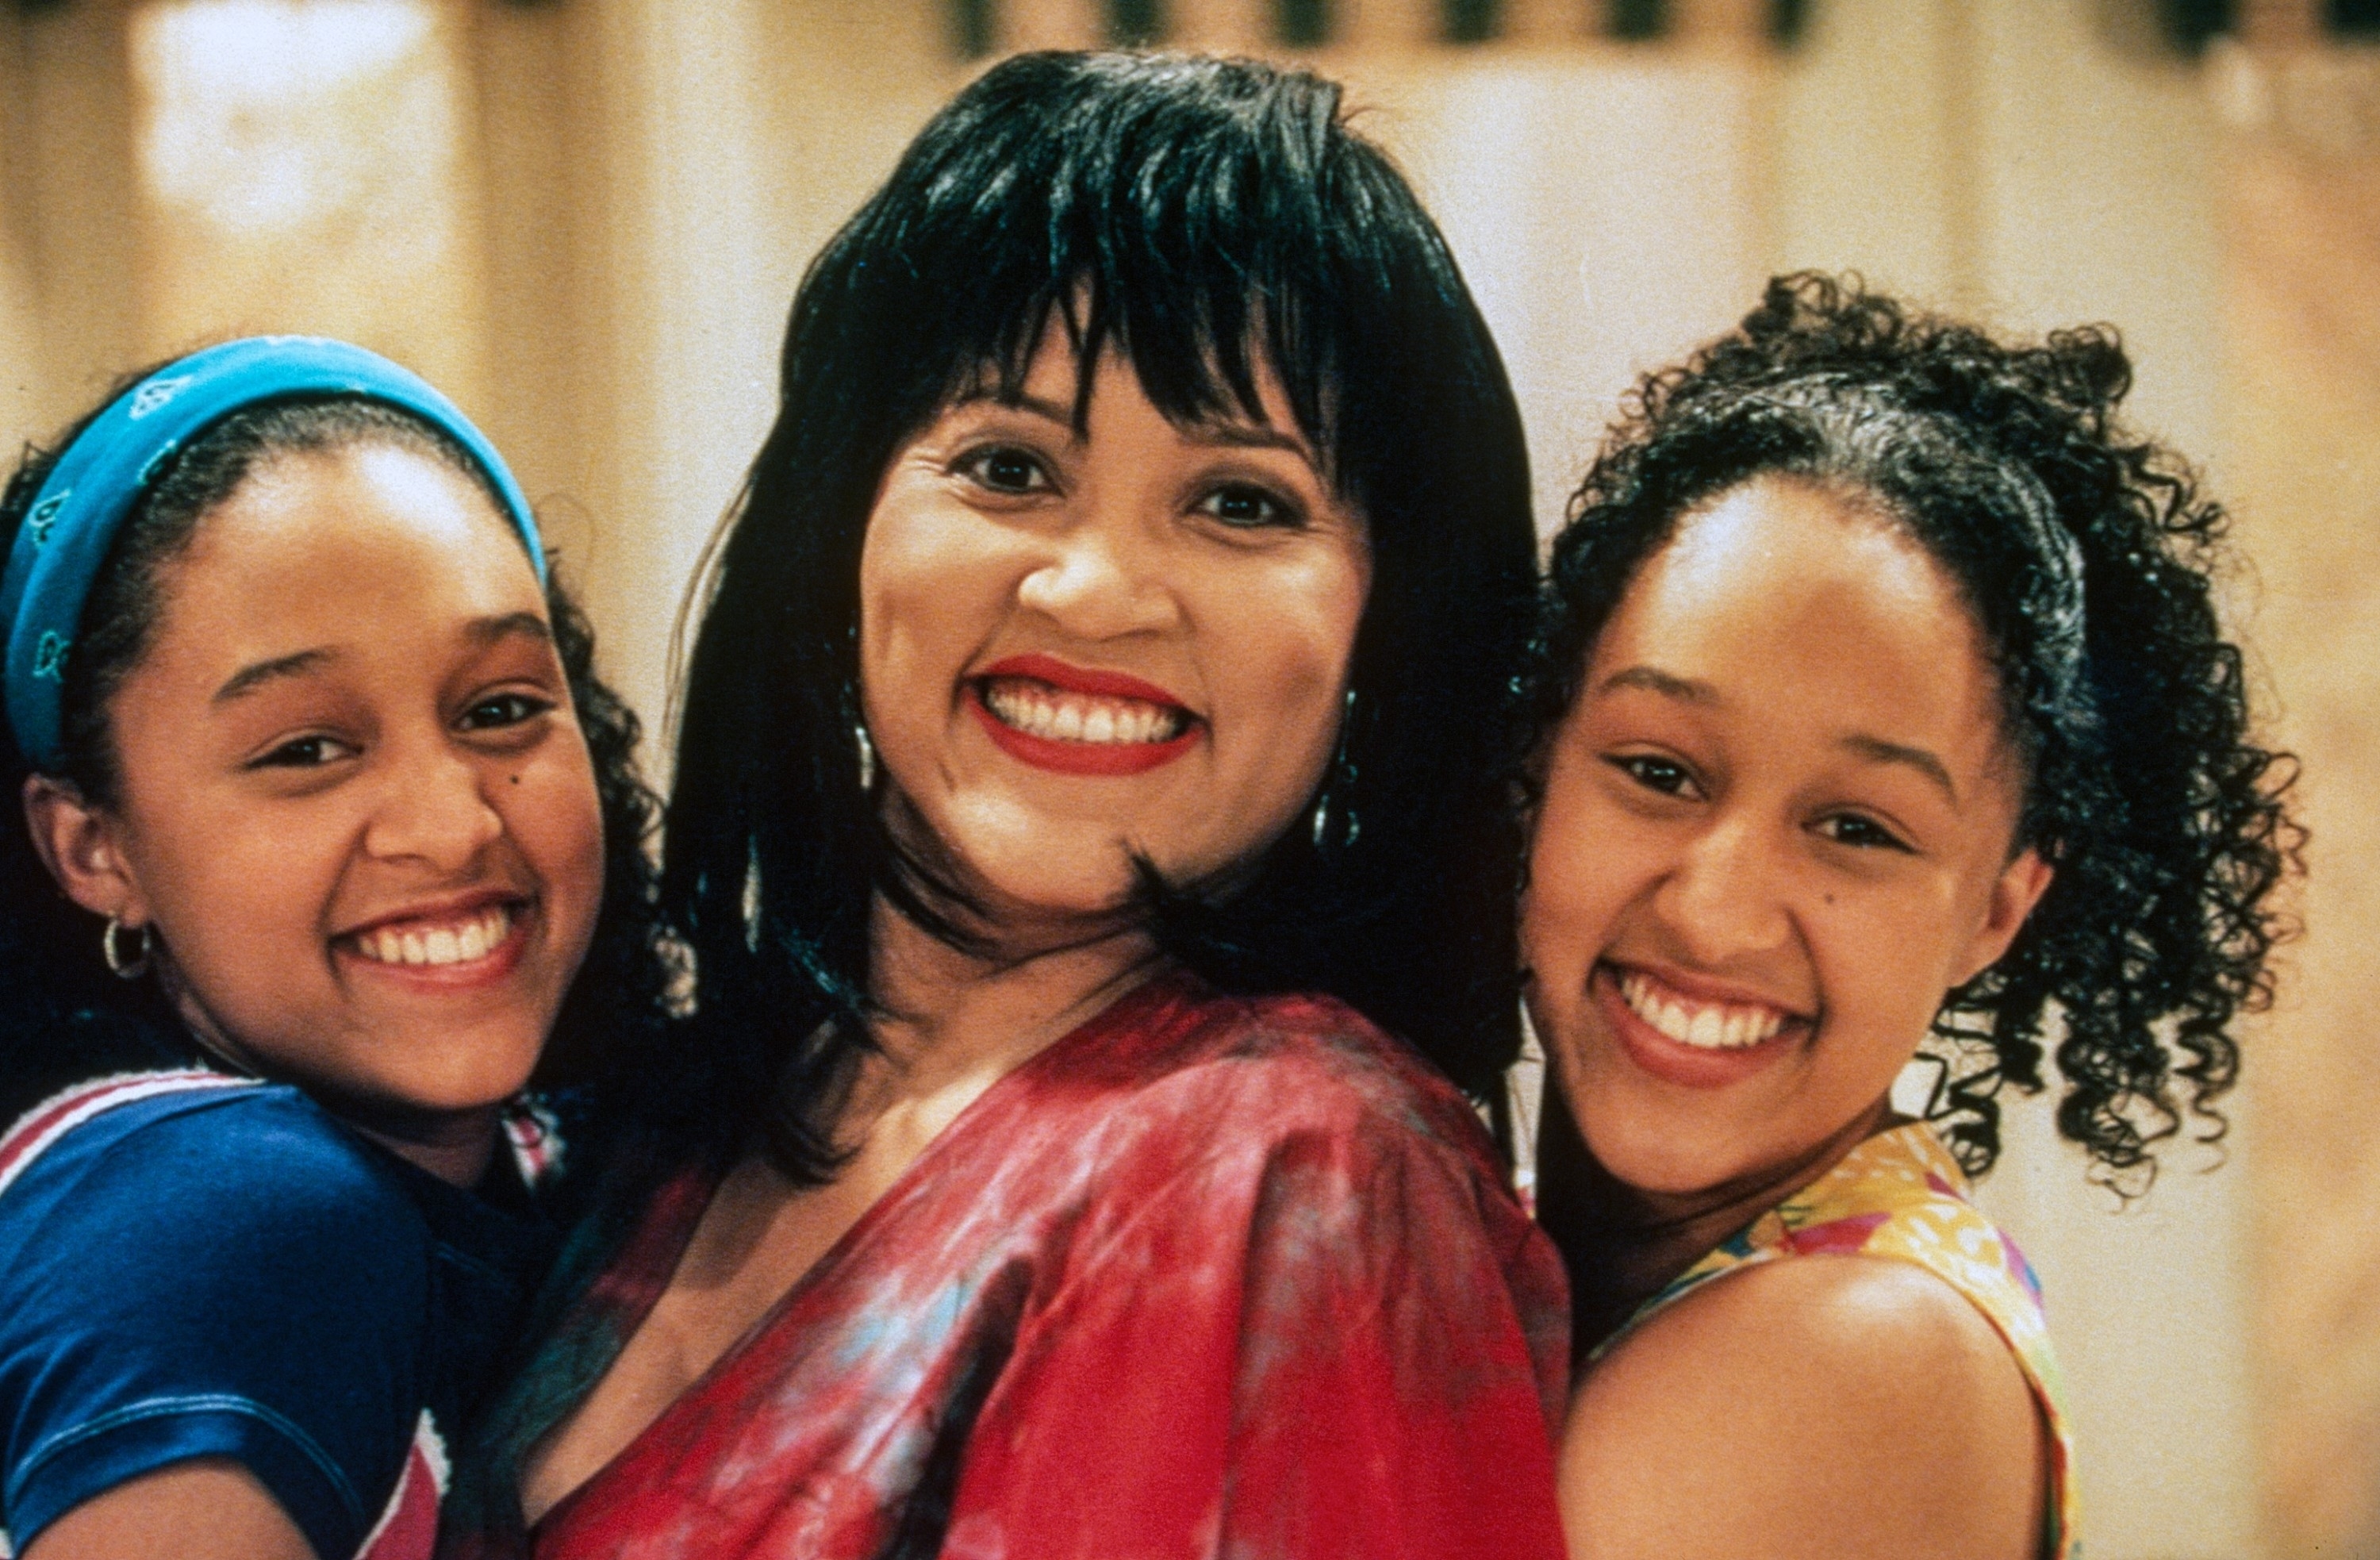 Tia and Tamera Mowry with Jackée Harry smiling together on set of &quot;Sister, Sister&quot;